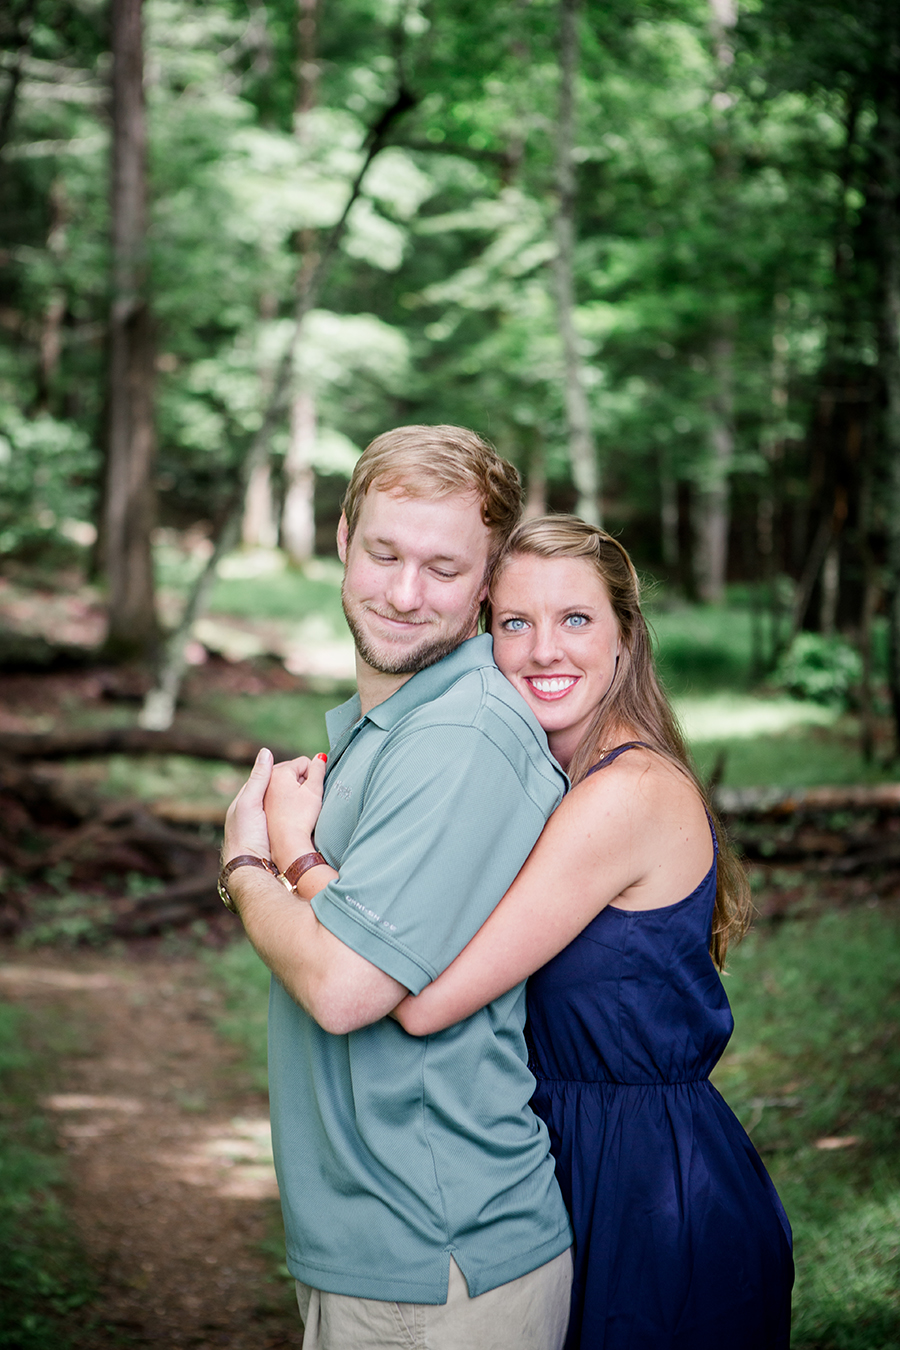 Her head against the back of his neck engagement photo by Knoxville Wedding Photographer, Amanda May Photos.